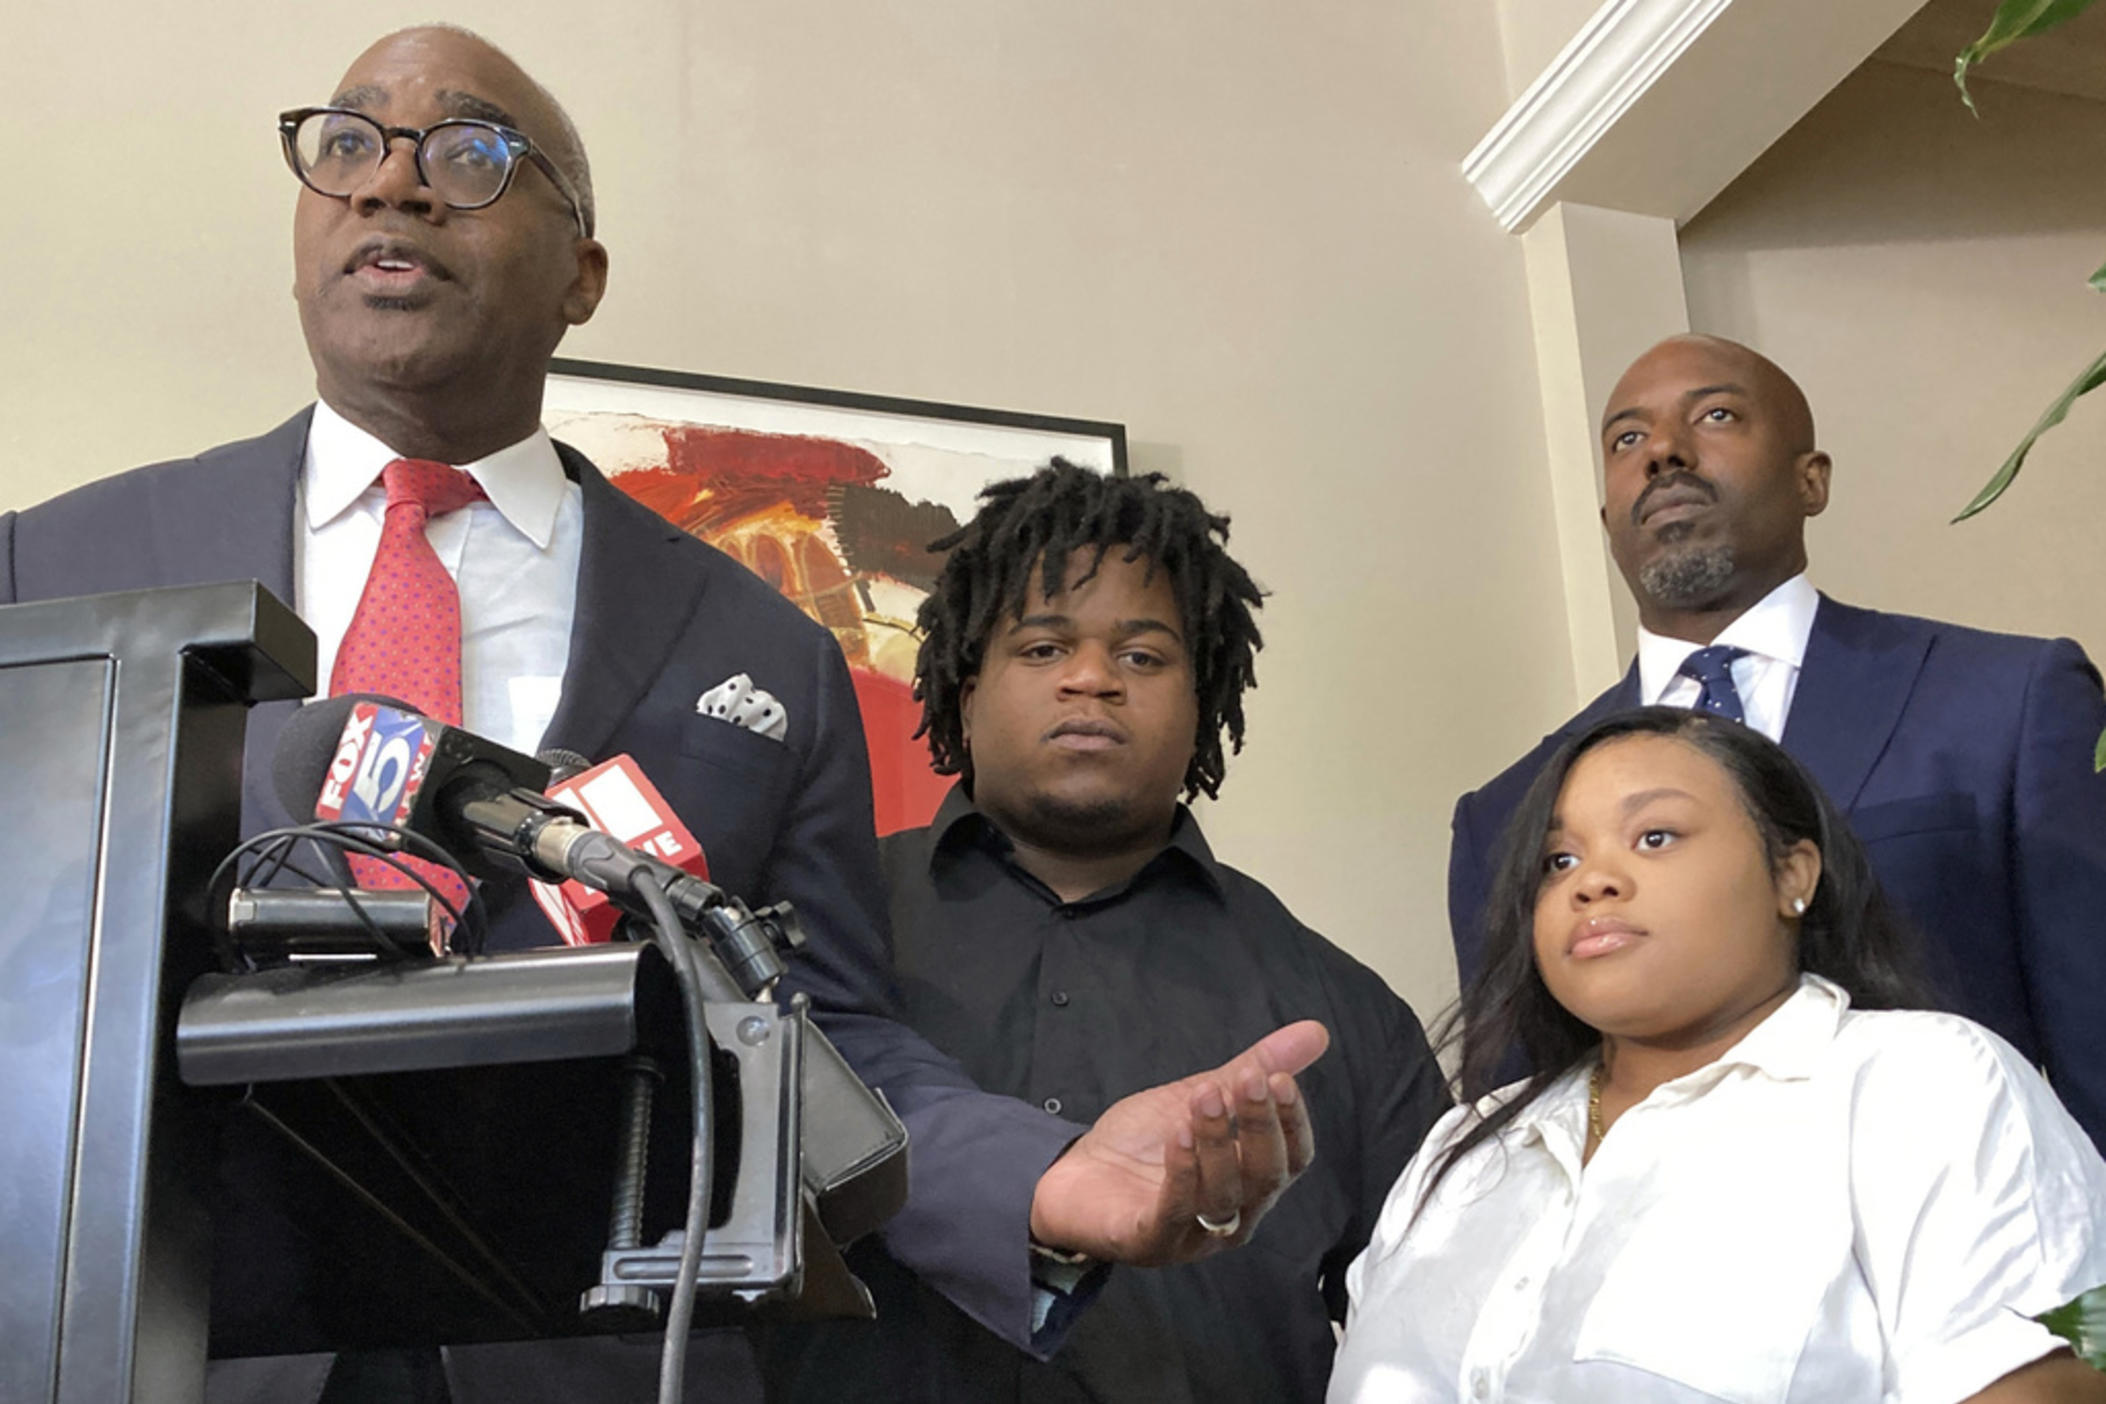 Attorney Roderick Edmond, from left, joined by Treveon Isaiah Taylor, Sr., Jessica Ross and attorney Cory Lynch, speaks during a news conference, Wednesday, Aug. 9, 2023, in Atlanta, announcing a lawsuit against a doctor and Southern Regional Medical Center, a hospital south of Atlanta where Ross went on July 9 to have her son. A doctor used too much force and decapitated Ross's baby during delivery according to the lawsuit filed Wednesday, the attorneys said.